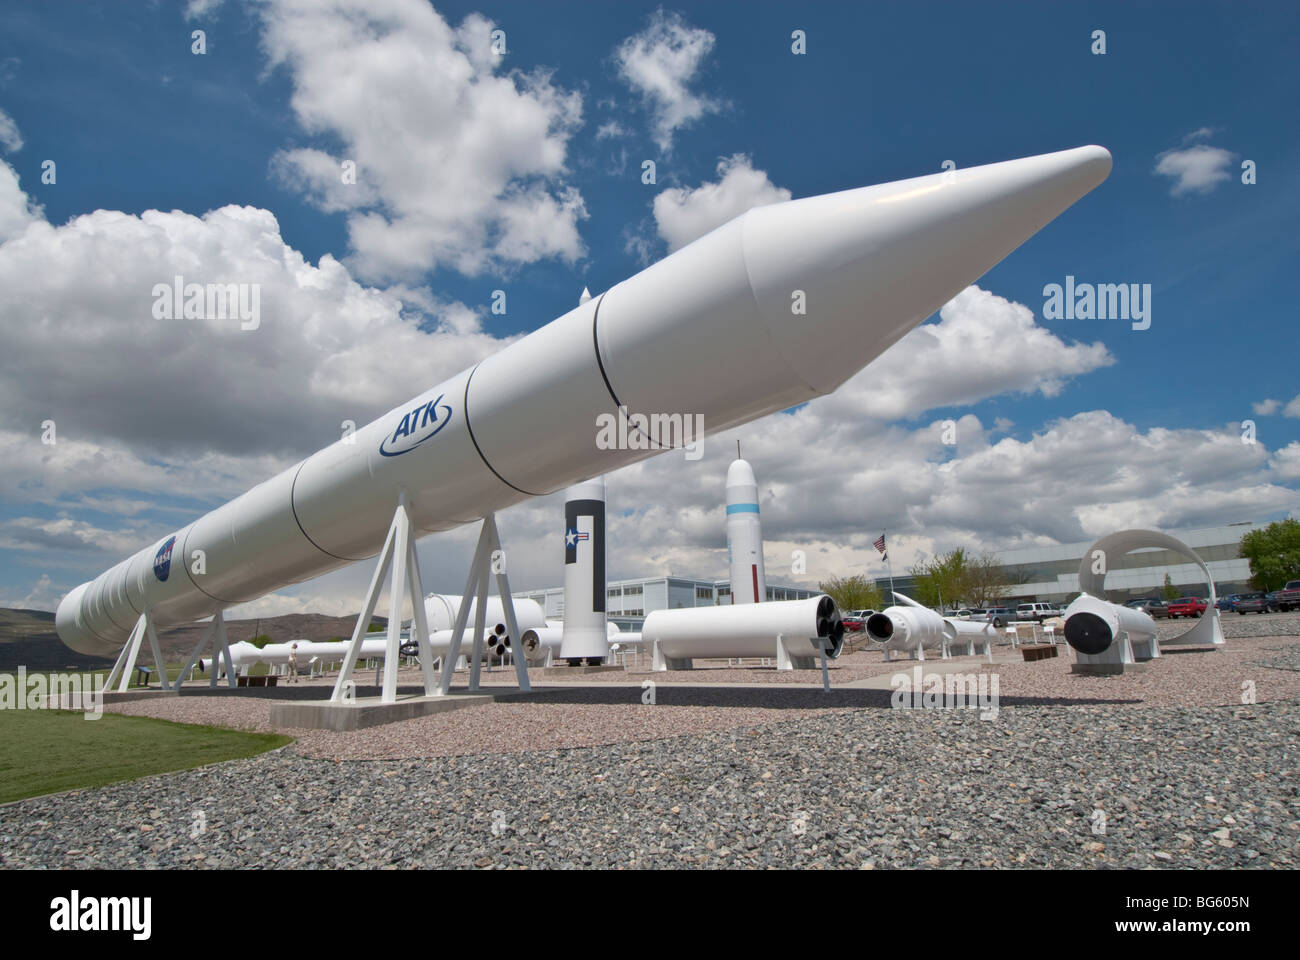 ATK Space Systems facility near Corinne Utah missle and rocket display Tu-777 Space Shuttle Reusable Solid Rocket Motor Stock Photo